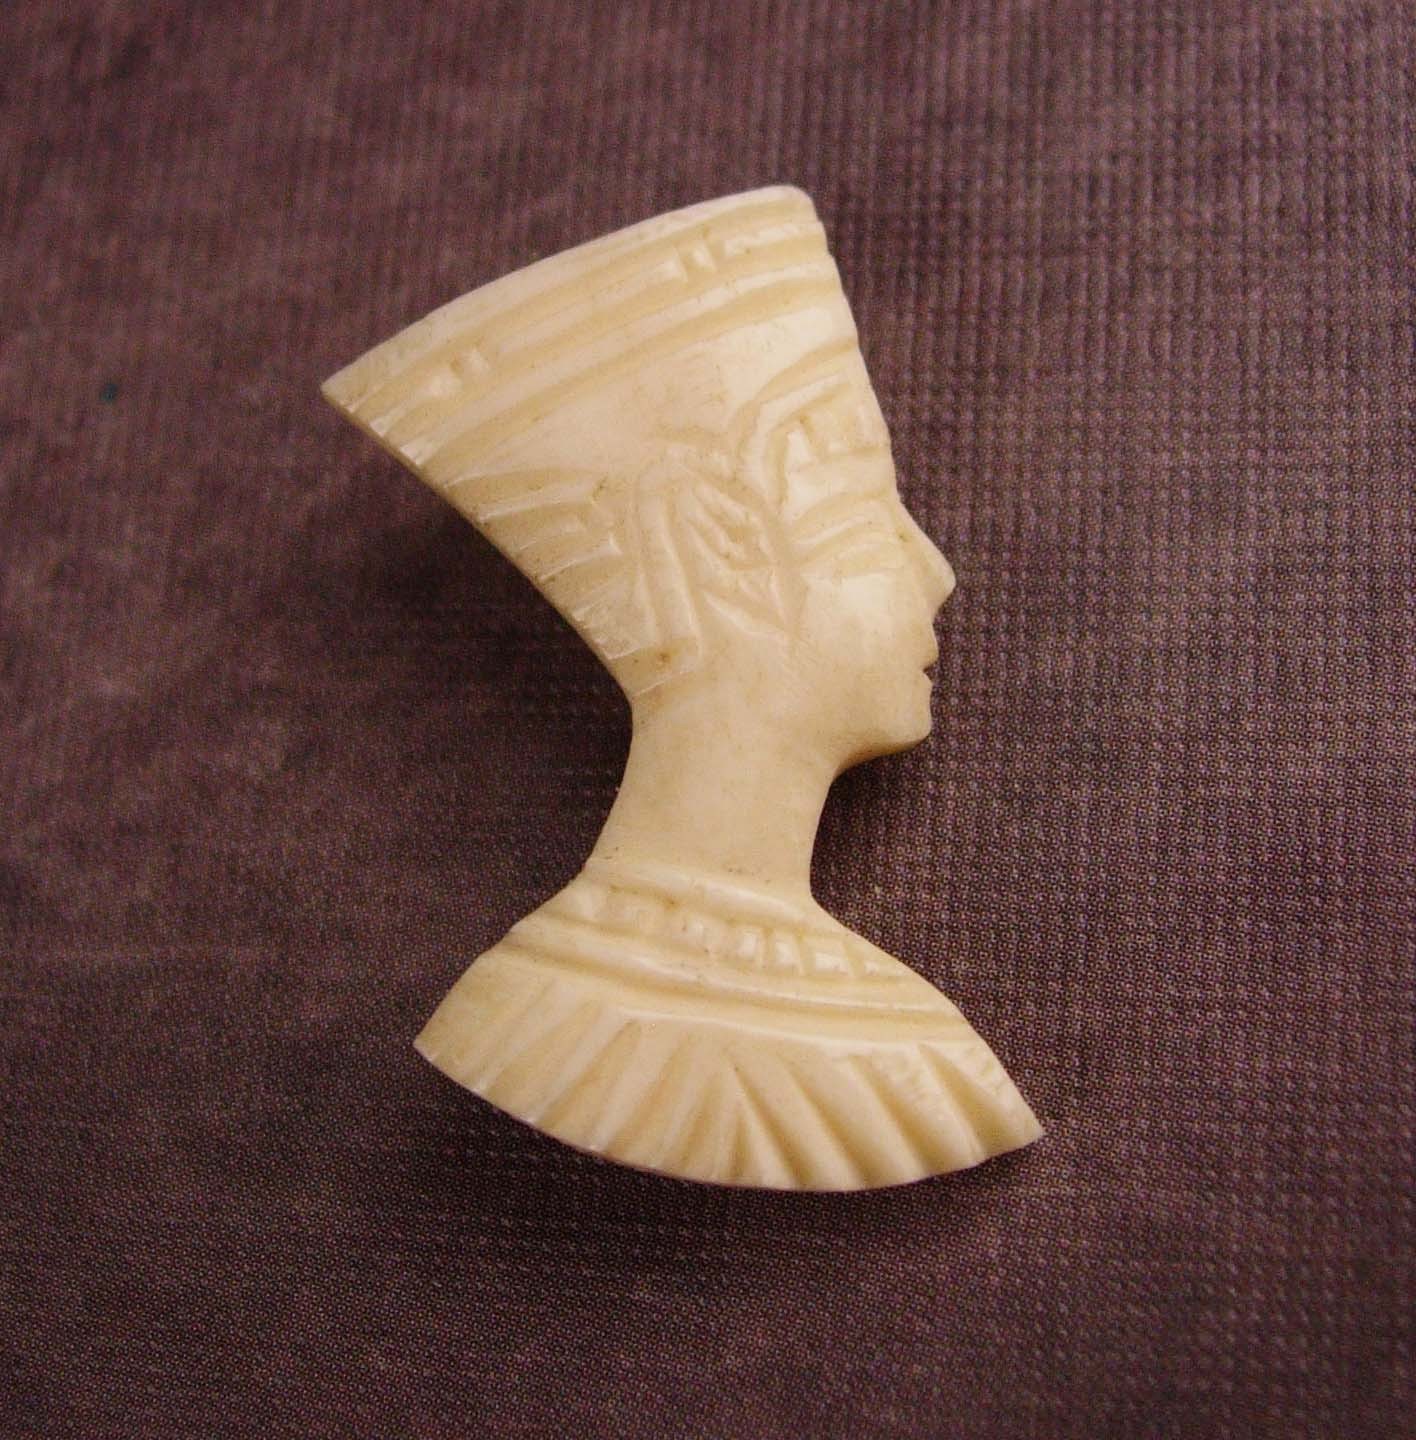 Primary image for Queen Nefertiti EGYPTIAN FIGURAL BROOCH - Vintage Egyptian Revival - carved esta